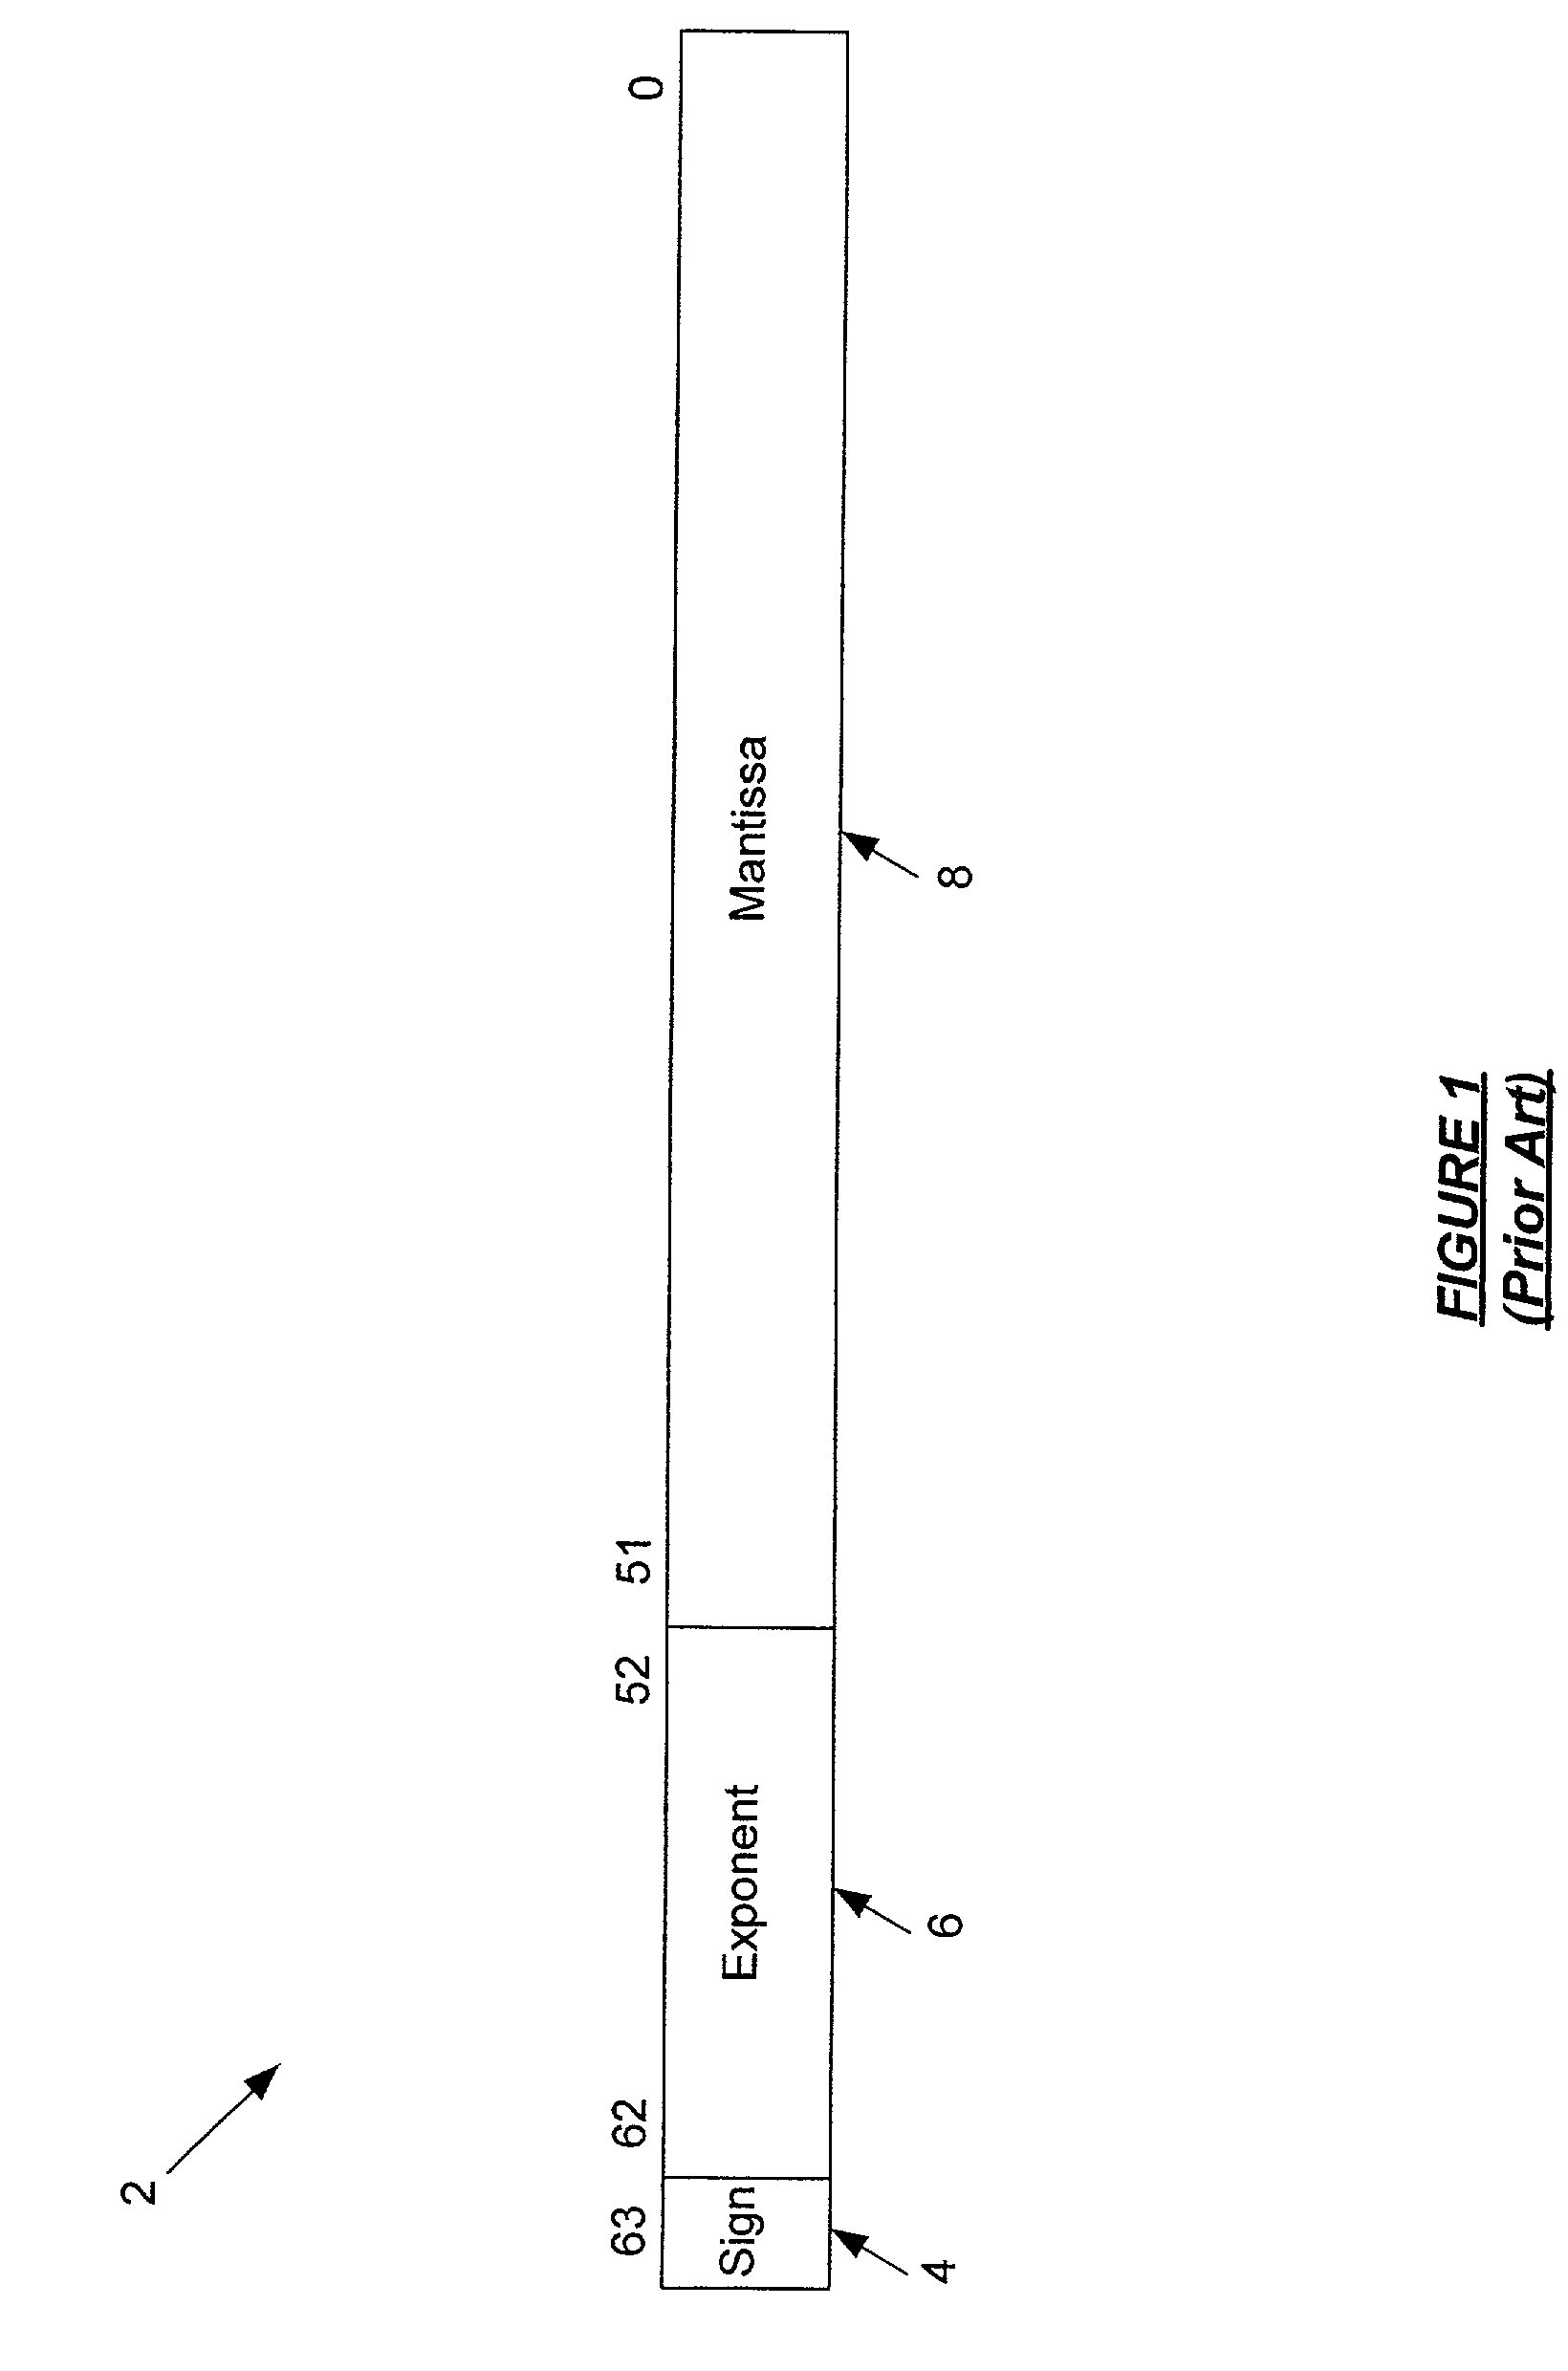 Method/apparatus for conversion of higher order bits of 64-bit integer to floating point using 53-bit adder hardware